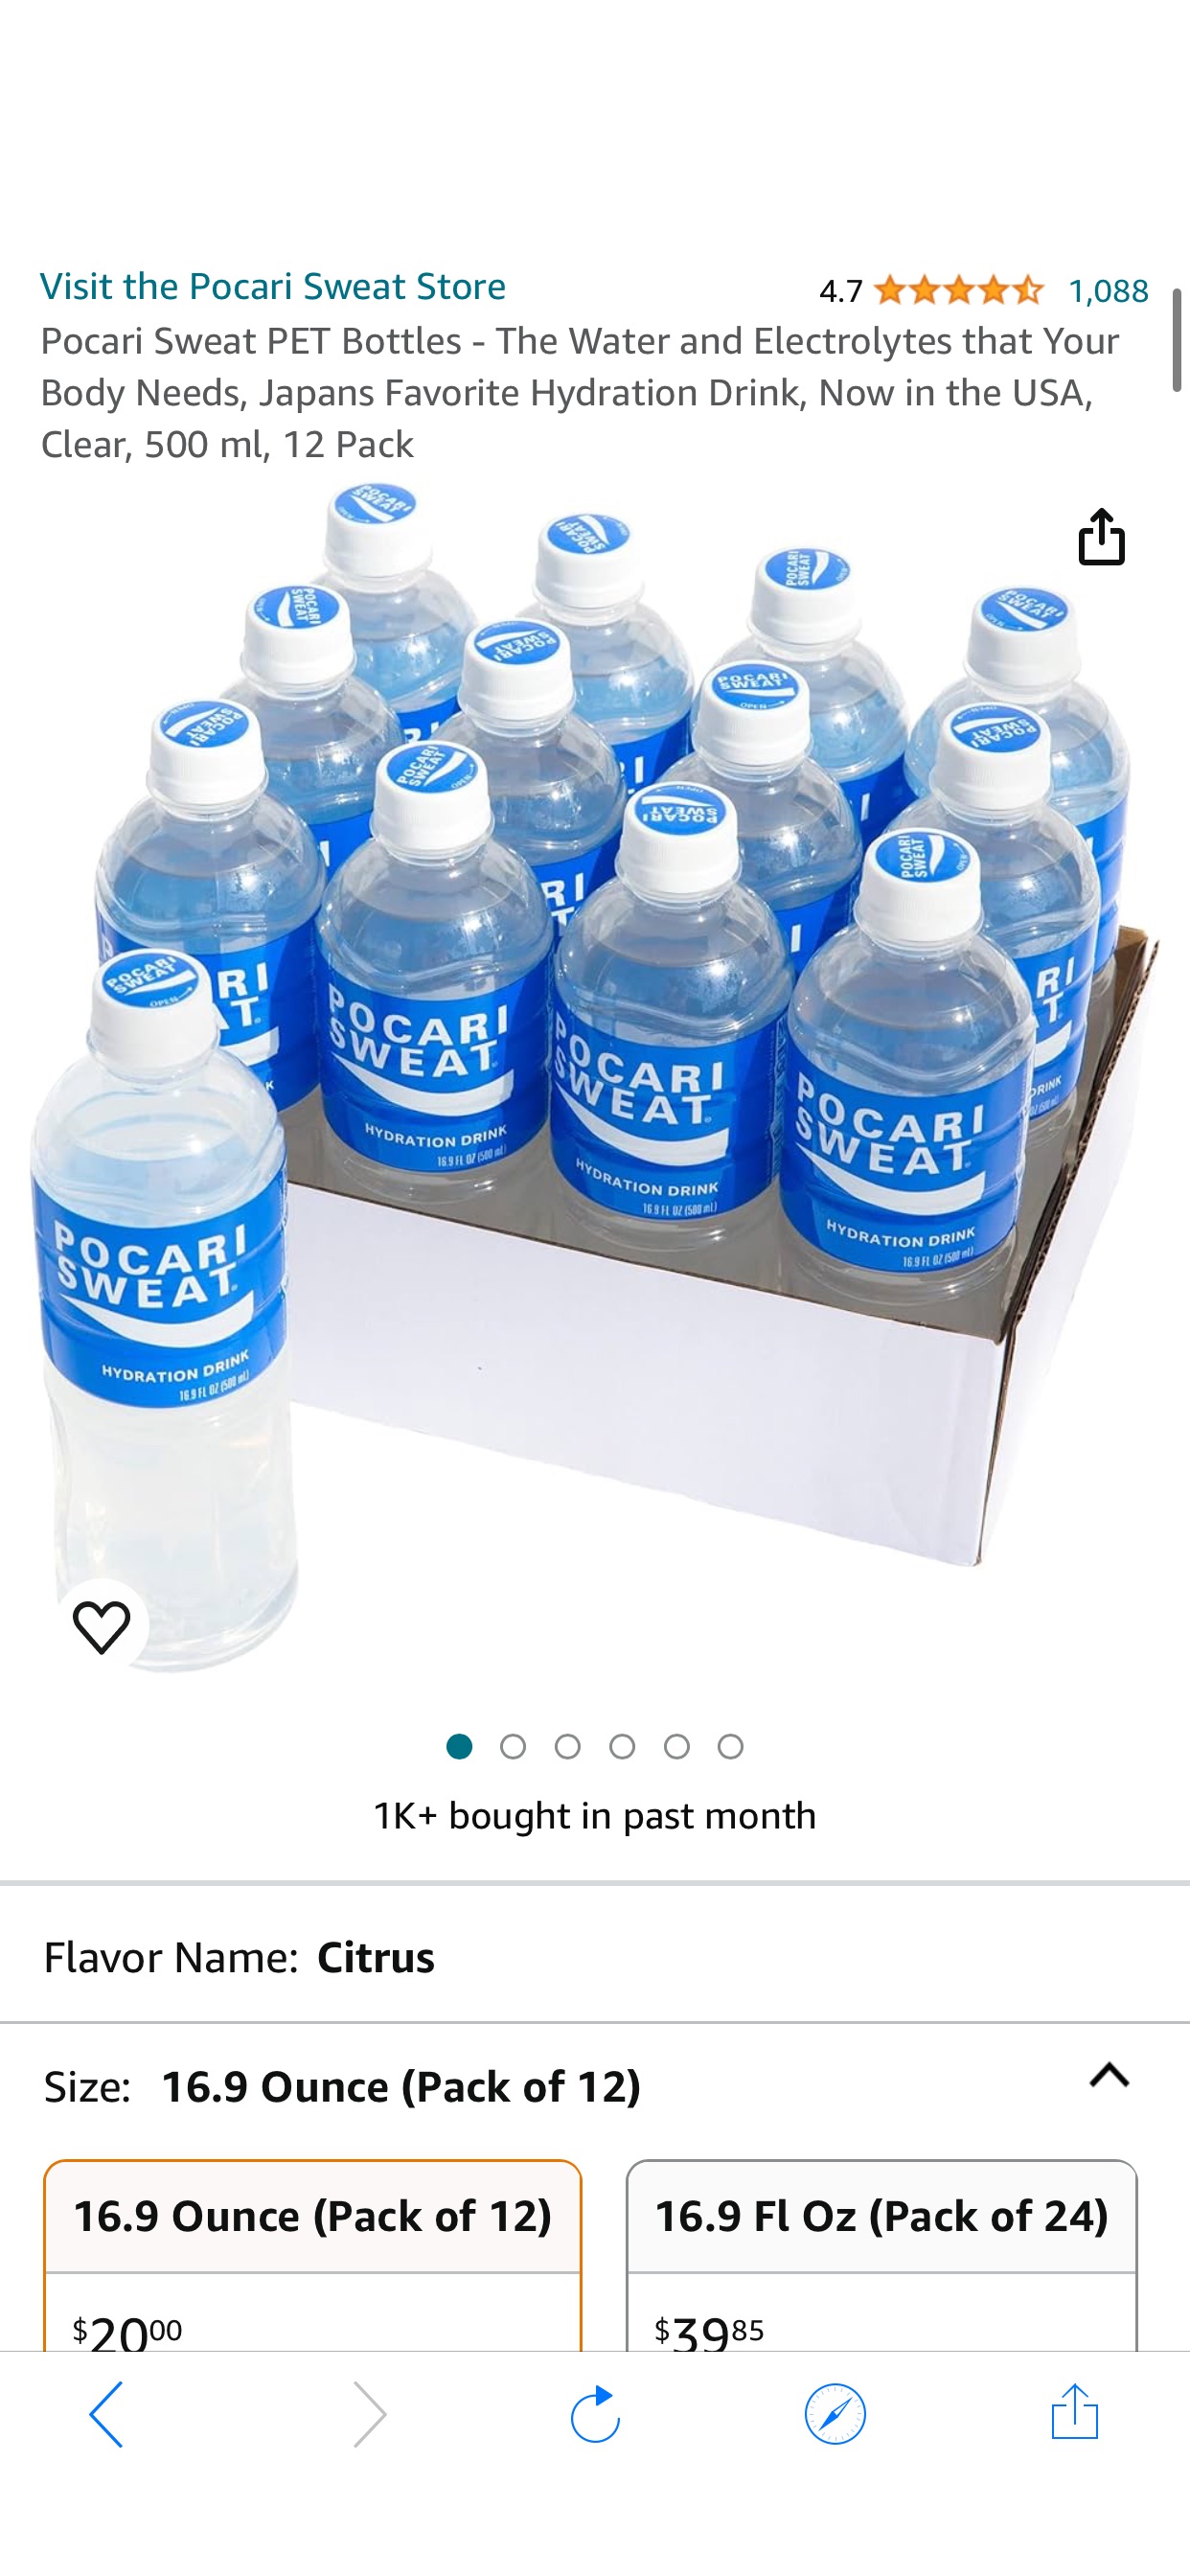 Amazon.com : Pocari Sweat PET Bottles - The Water and Electrolytes that Your Body Needs, Japans Favorite Hydration Drink, Now in the USA, Clear, 500 ml, 12 Pack : Grocery & Gourmet Food 电解质水